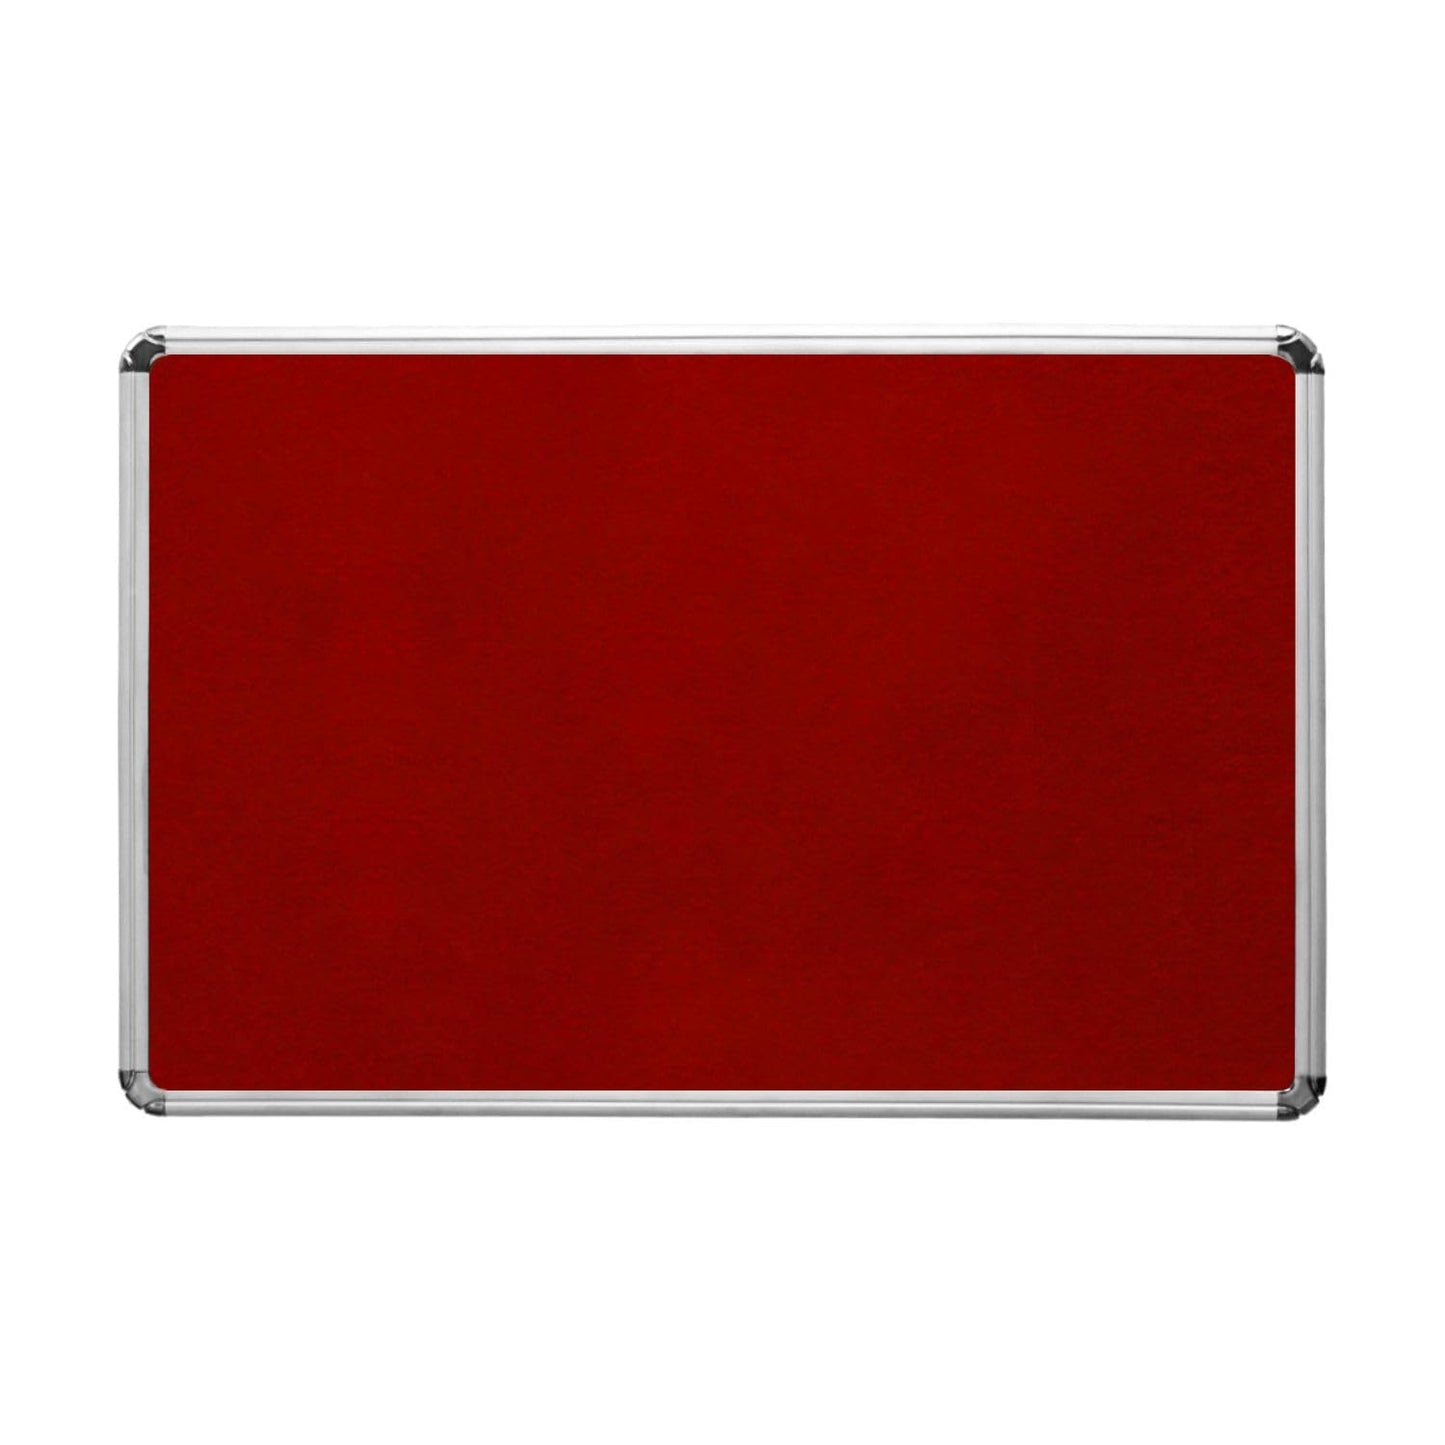 Digismart Noticeboard Nova Channel (Maroon) for Office, Home & School Aluminum Frame (Pack of 1) (Non Magnetic)